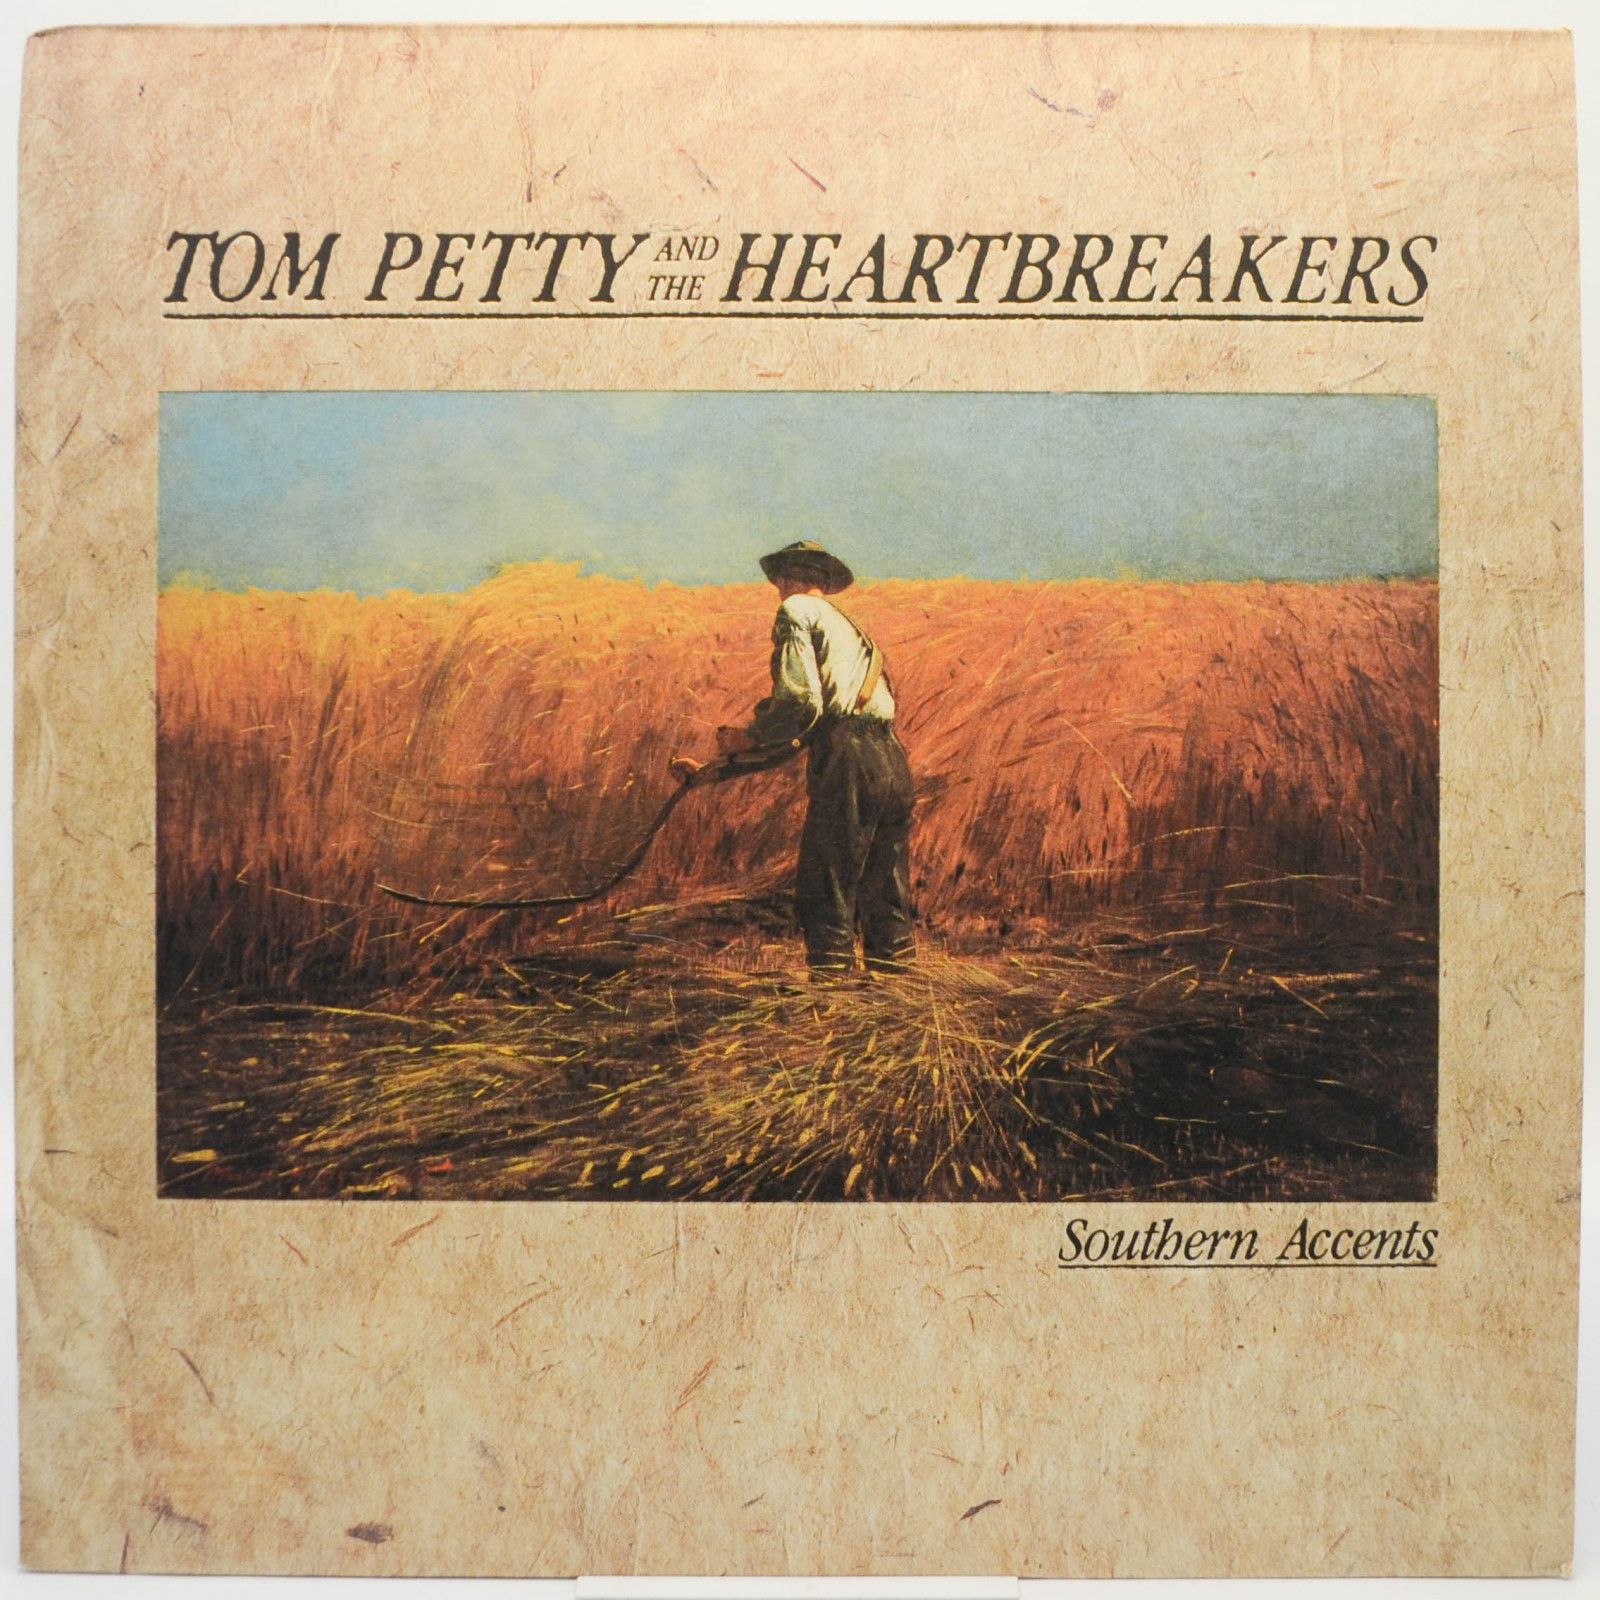 Tom Petty And The Heartbreakers — Southern Accents, 1985